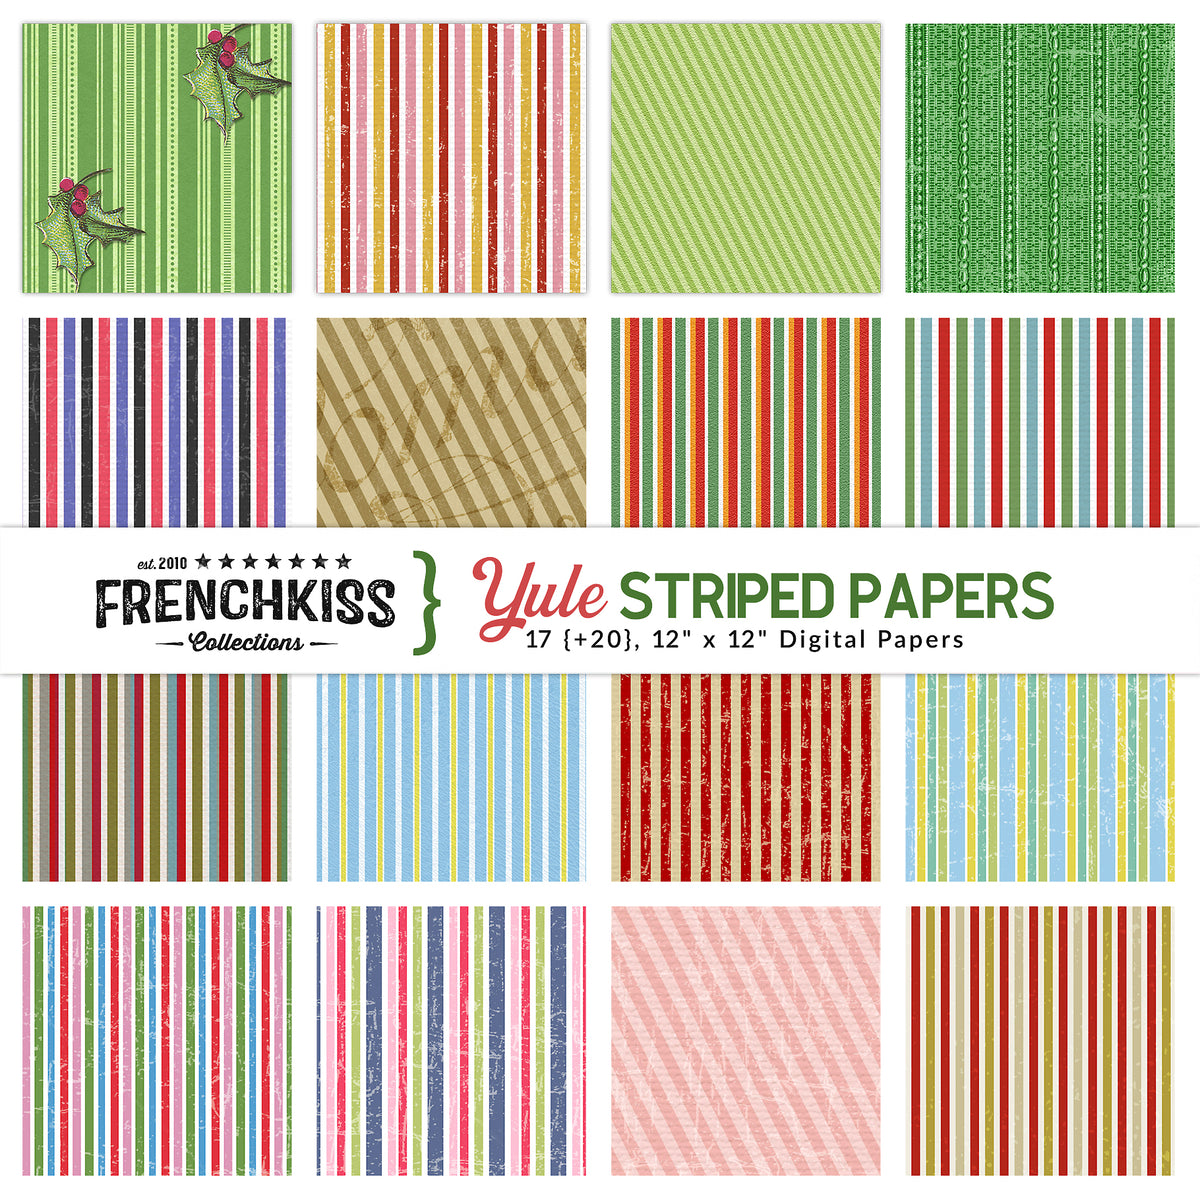 Yule Striped Digital Papers created to complement the Vintage Christmas Illustrations Compendium.